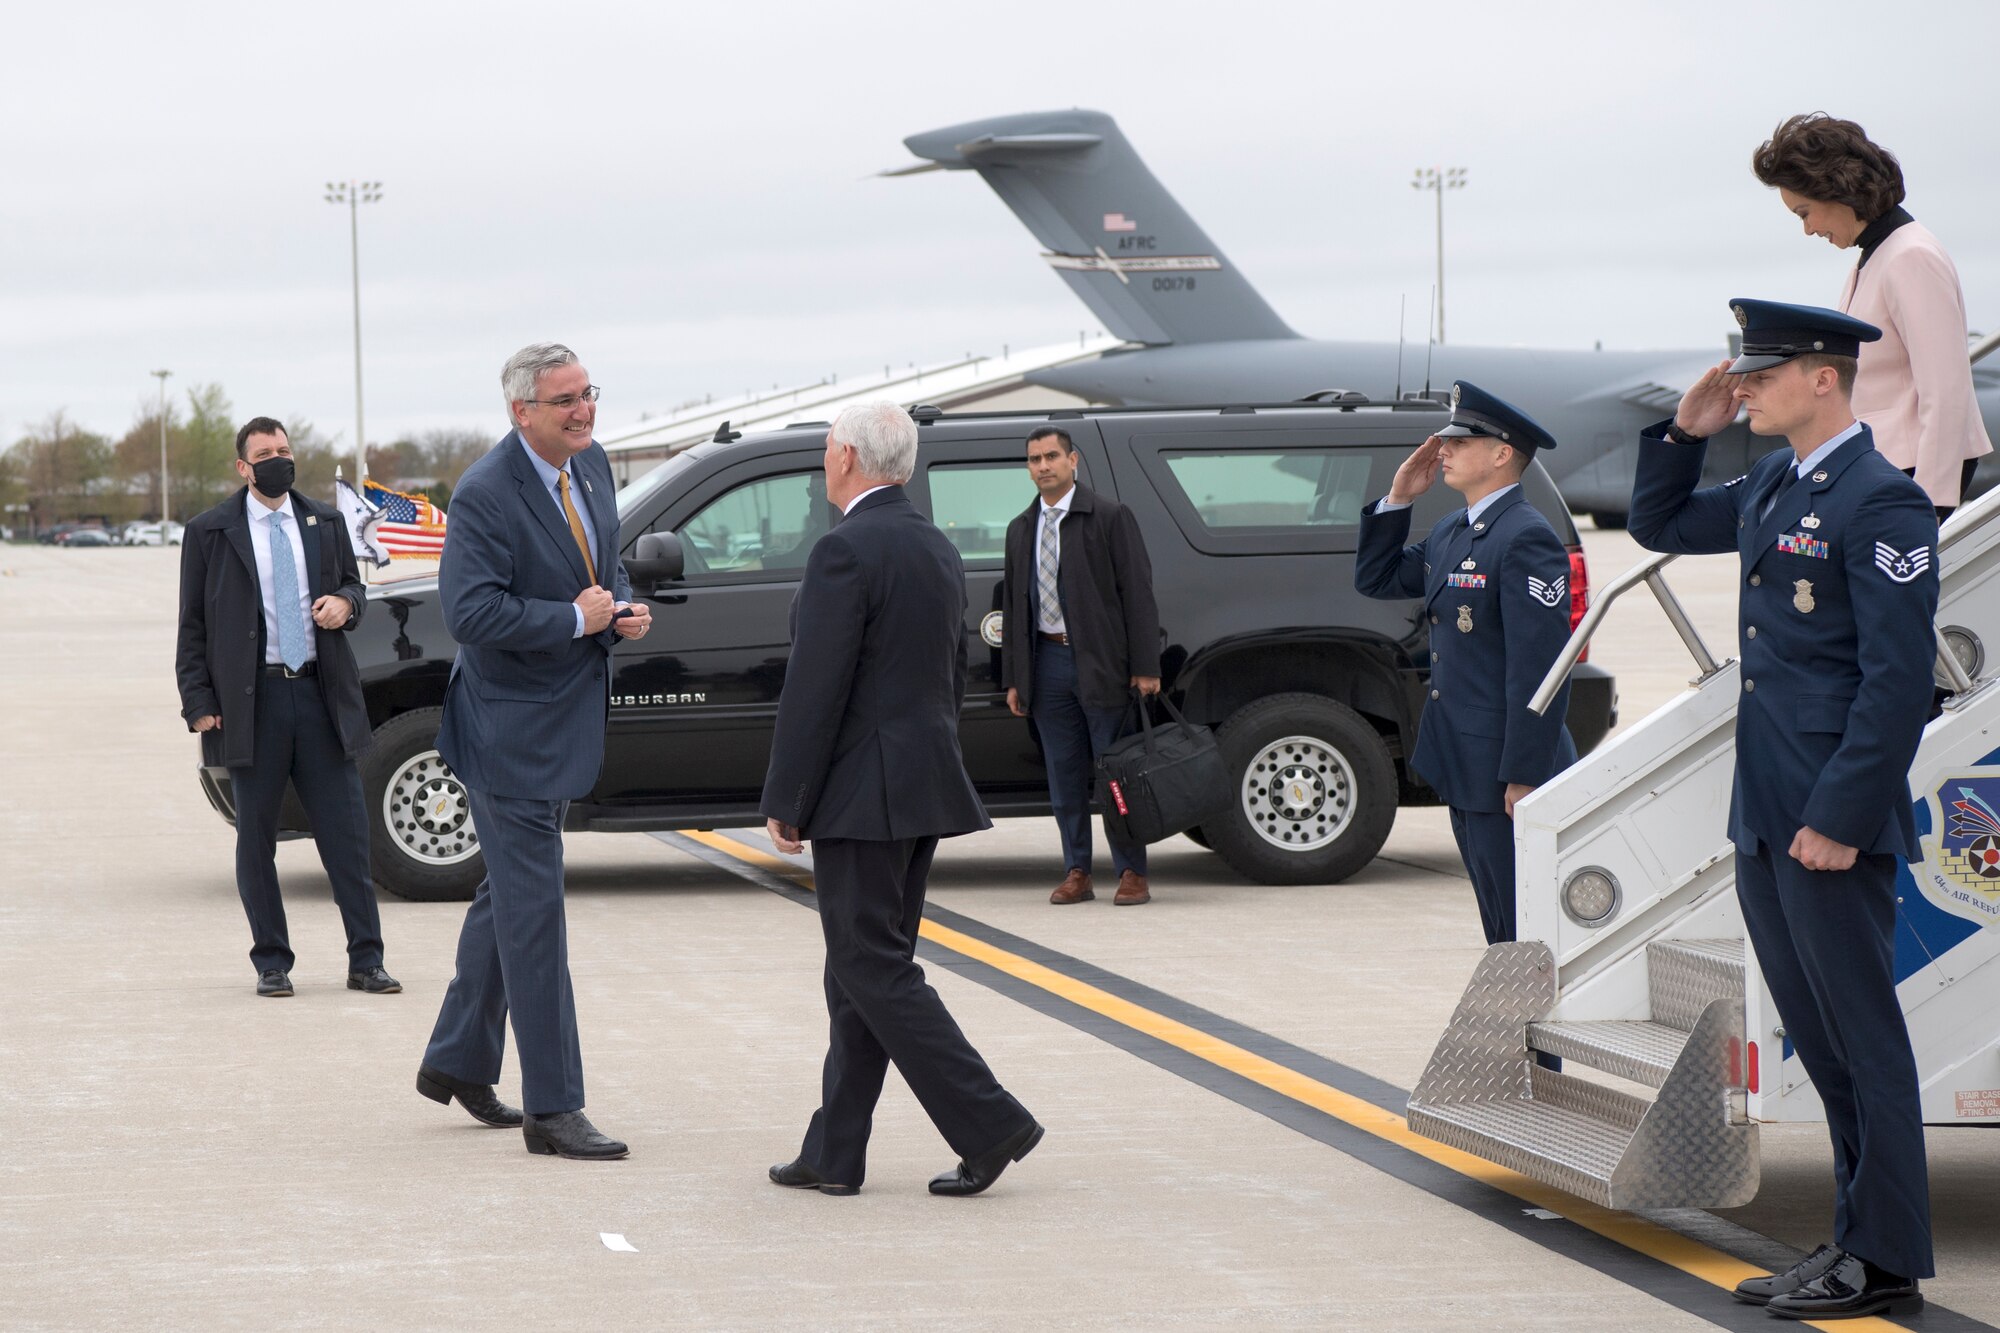 Indiana Governor Eric Holcomb greets Vice President Mike Pence after arriving at Grissom Air Reserve Base, Indiana April 30, 2020. Pence came to Indiana to meet with local business leaders who are building ventilators during the COVID-19 outbreak. (U.S Air Force photo/Ben Mota)